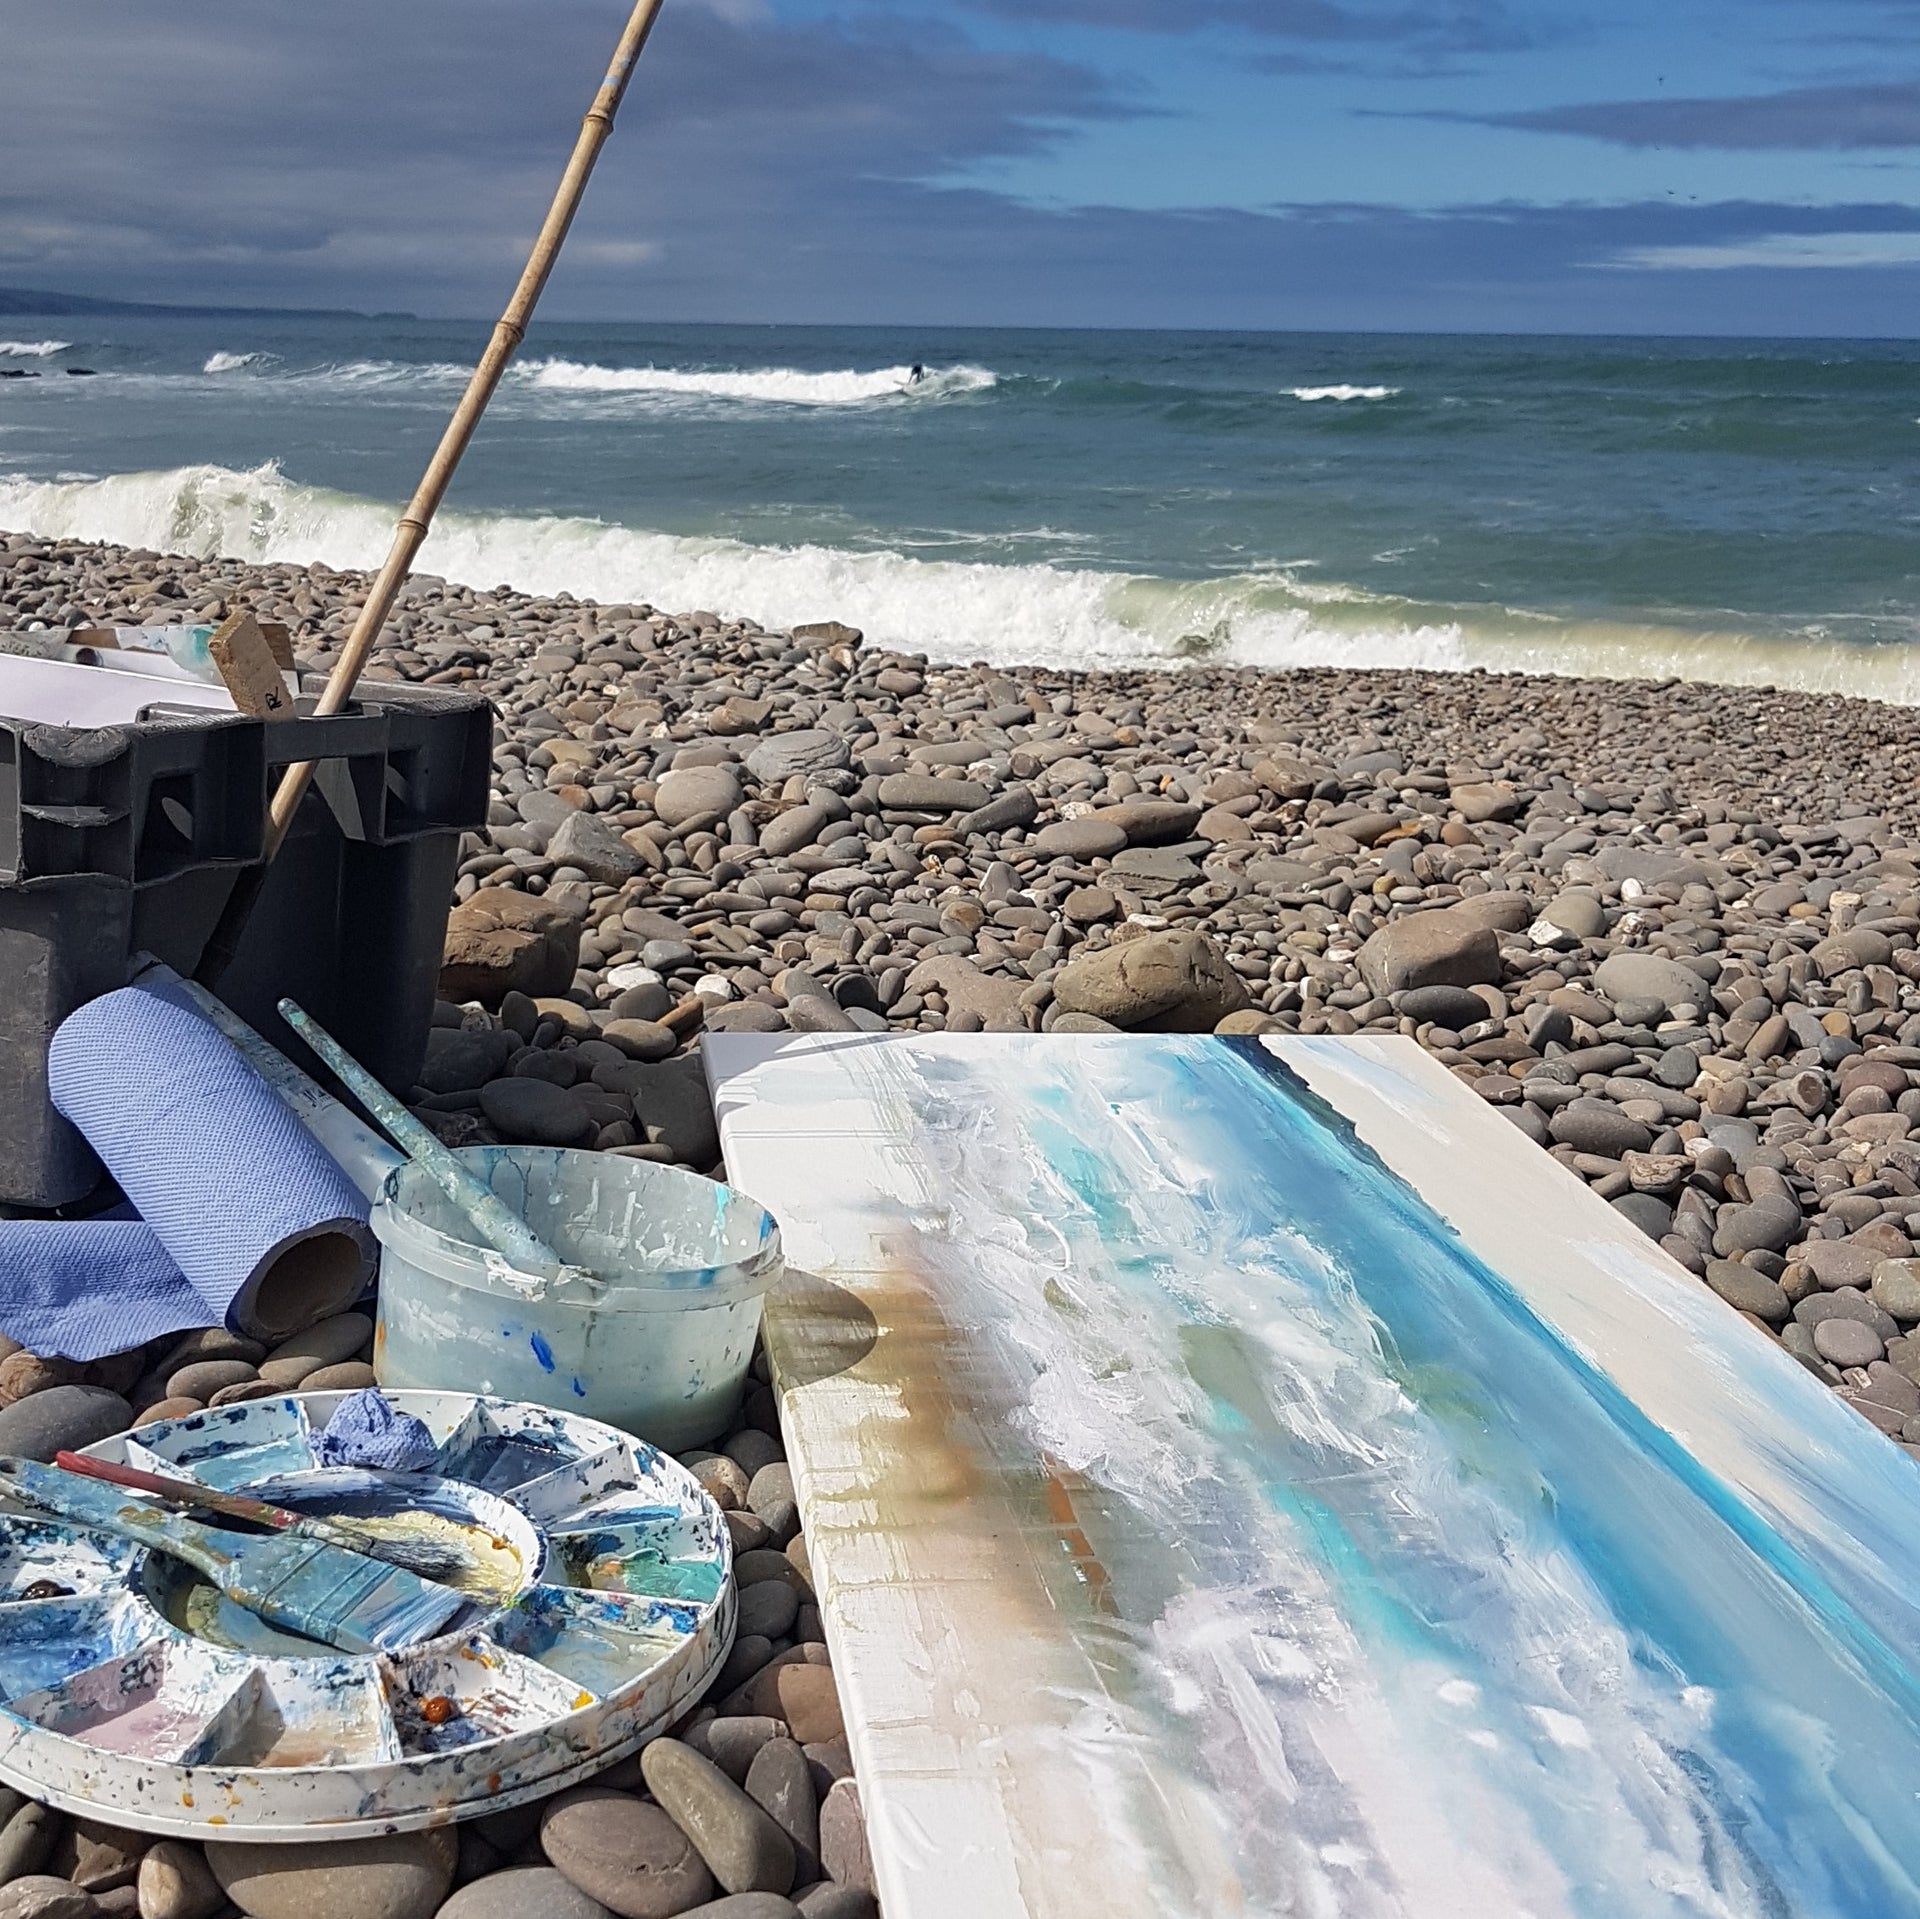 Plein air painting at Northcott mouth with a canvas on the stones